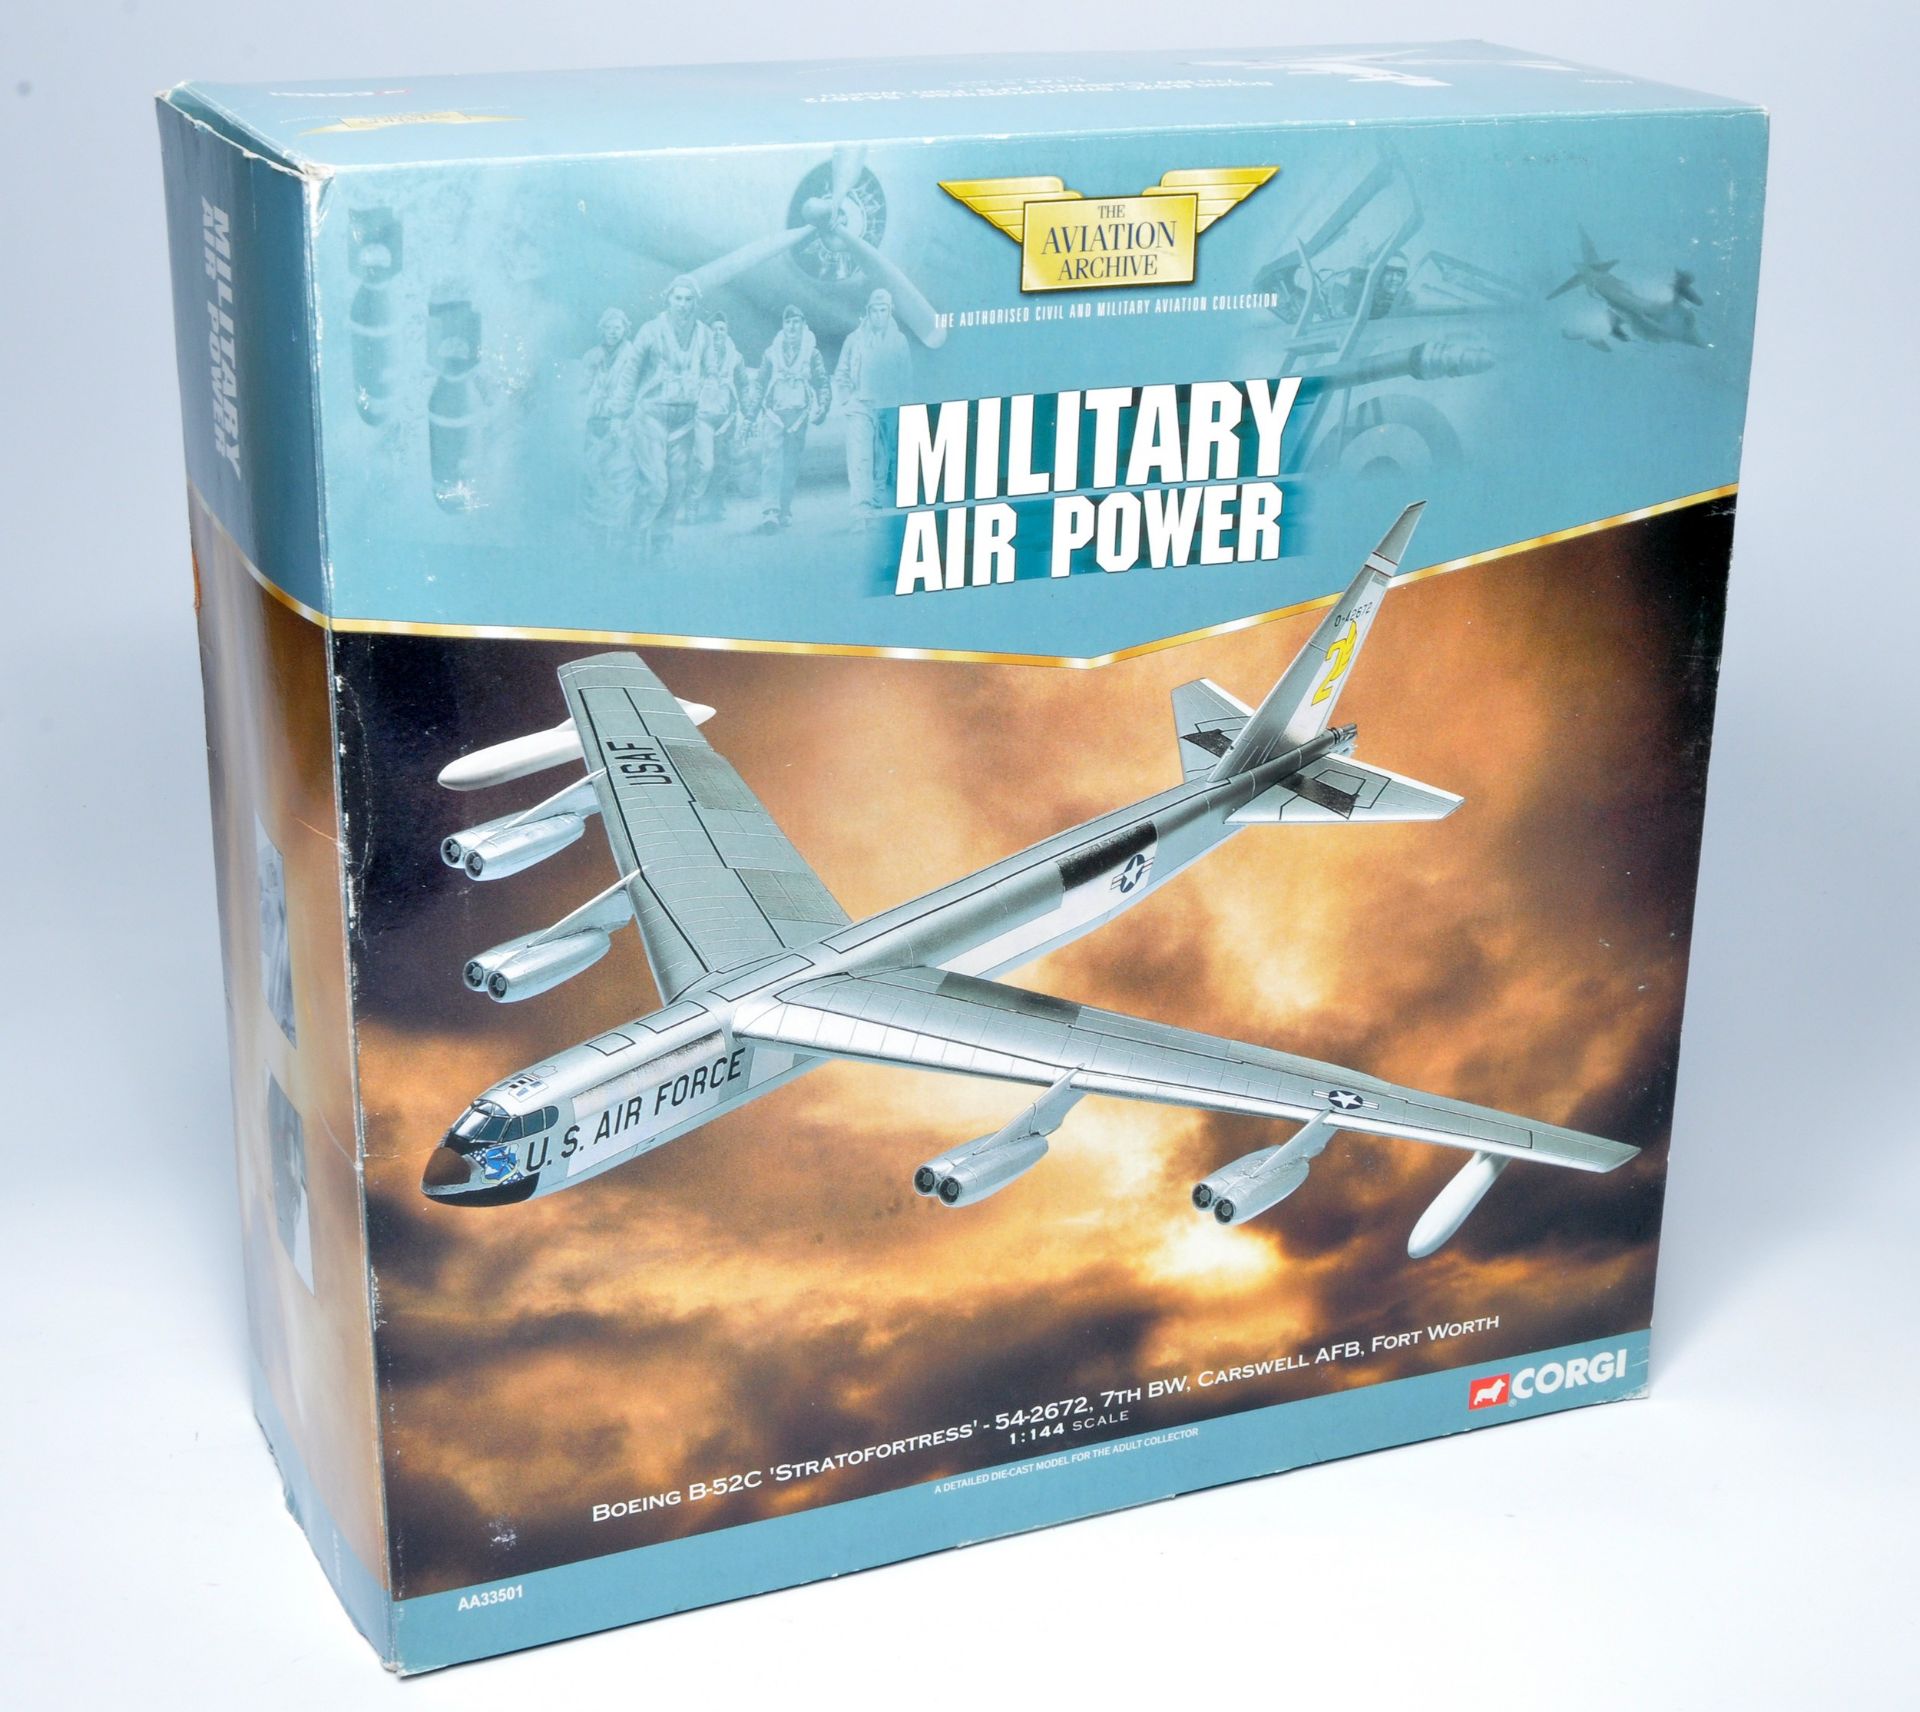 Corgi 1/144 diecast model aircraft issue comprising No. AA33501 Boeing B52C Stratofortress. Looks to